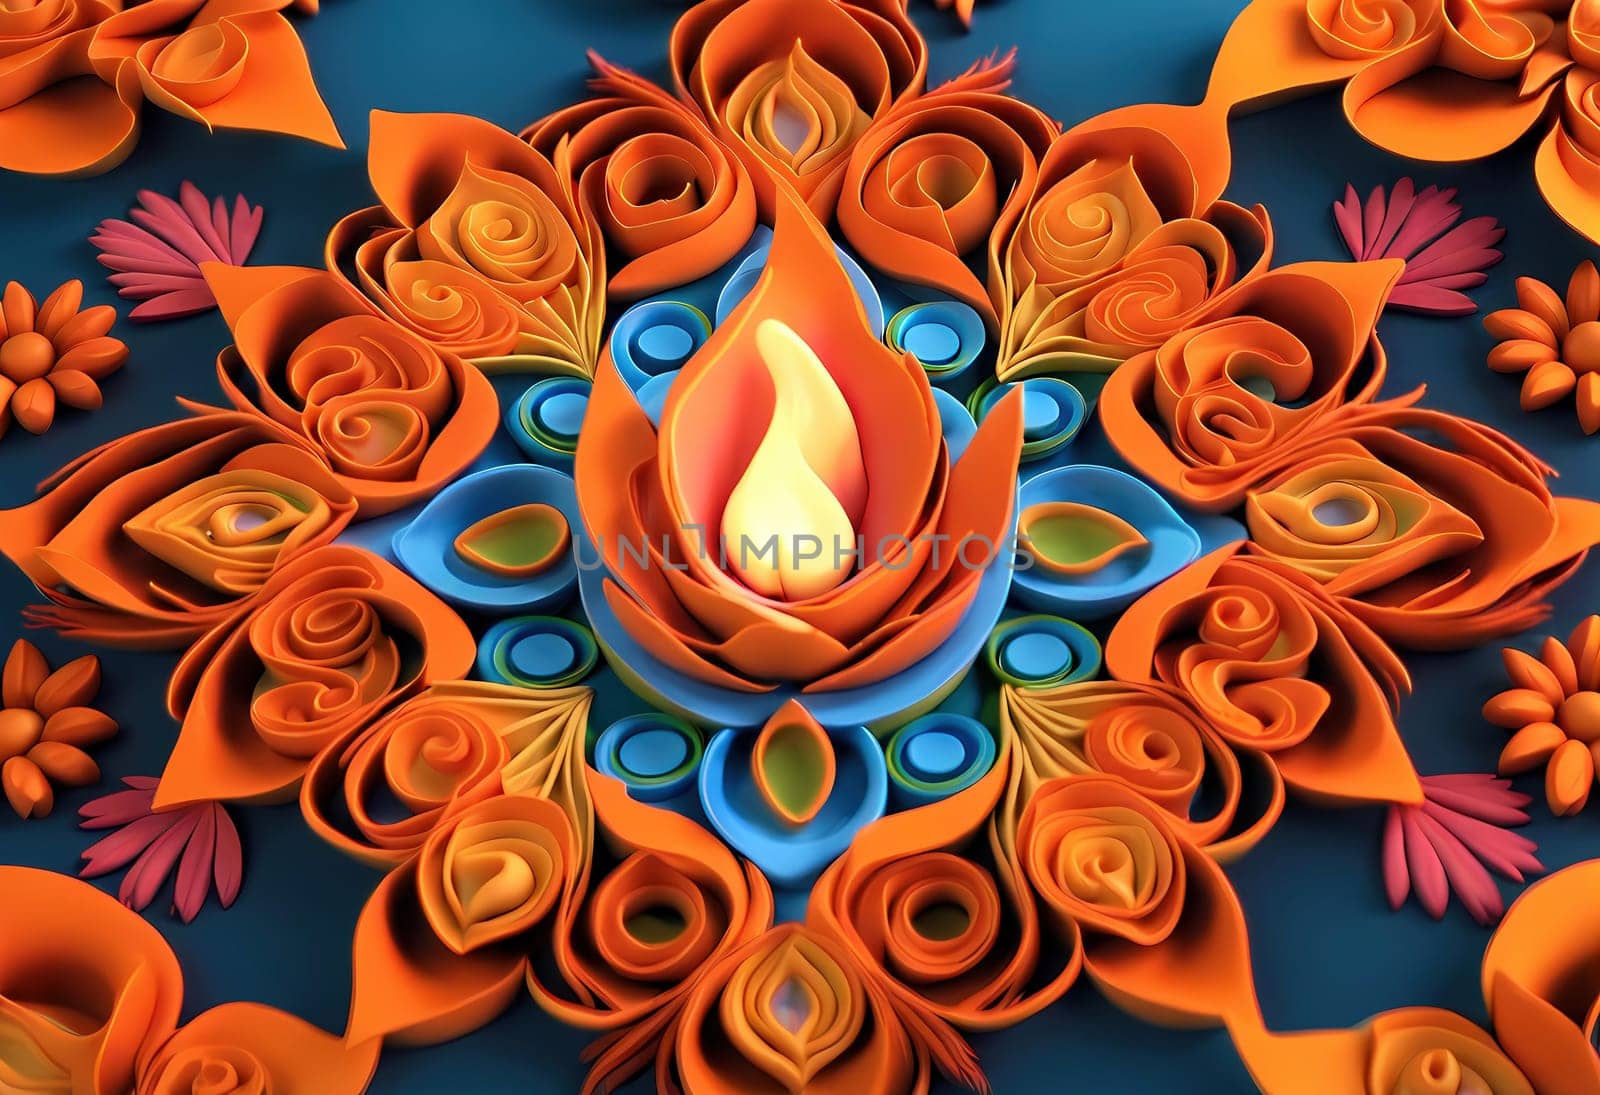 3D Abstract illustration in the style of Hindu faith. fire rituals pattern of flowers diversity of ideas on spirituality and traditions by rostik924